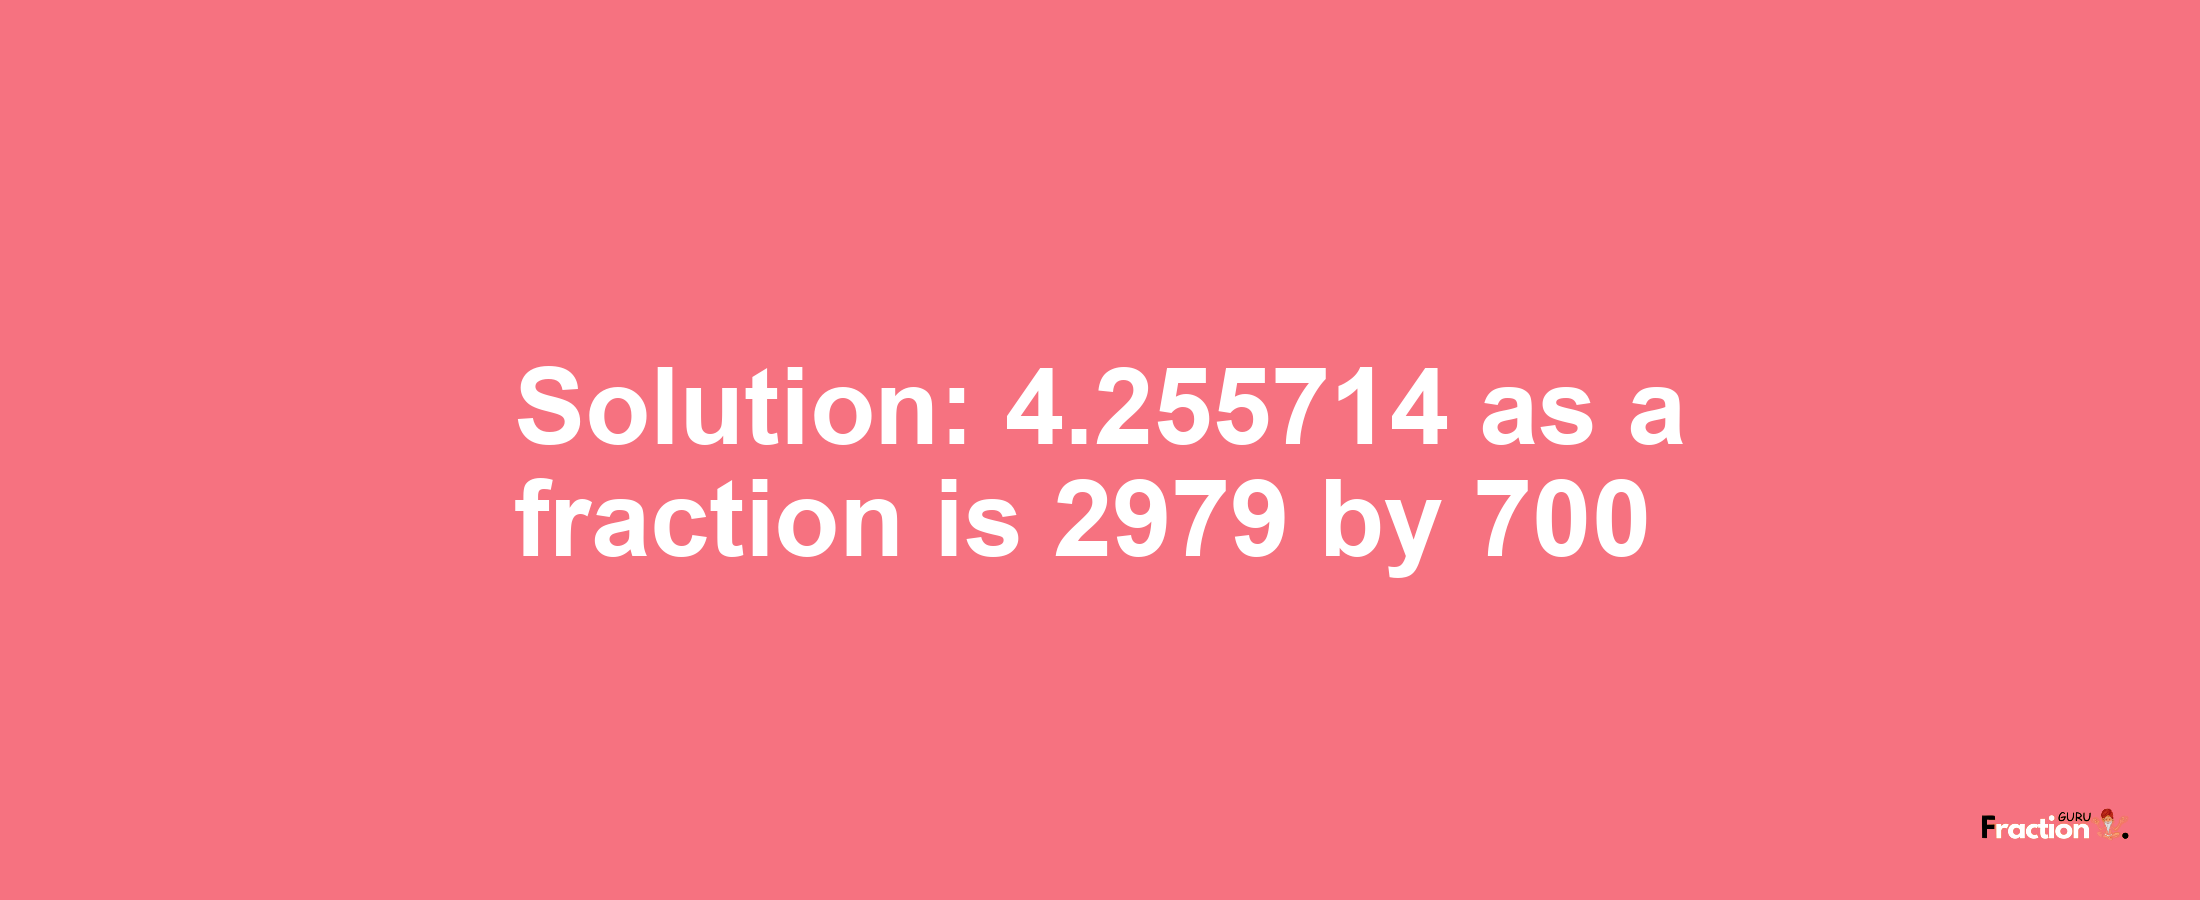 Solution:4.255714 as a fraction is 2979/700